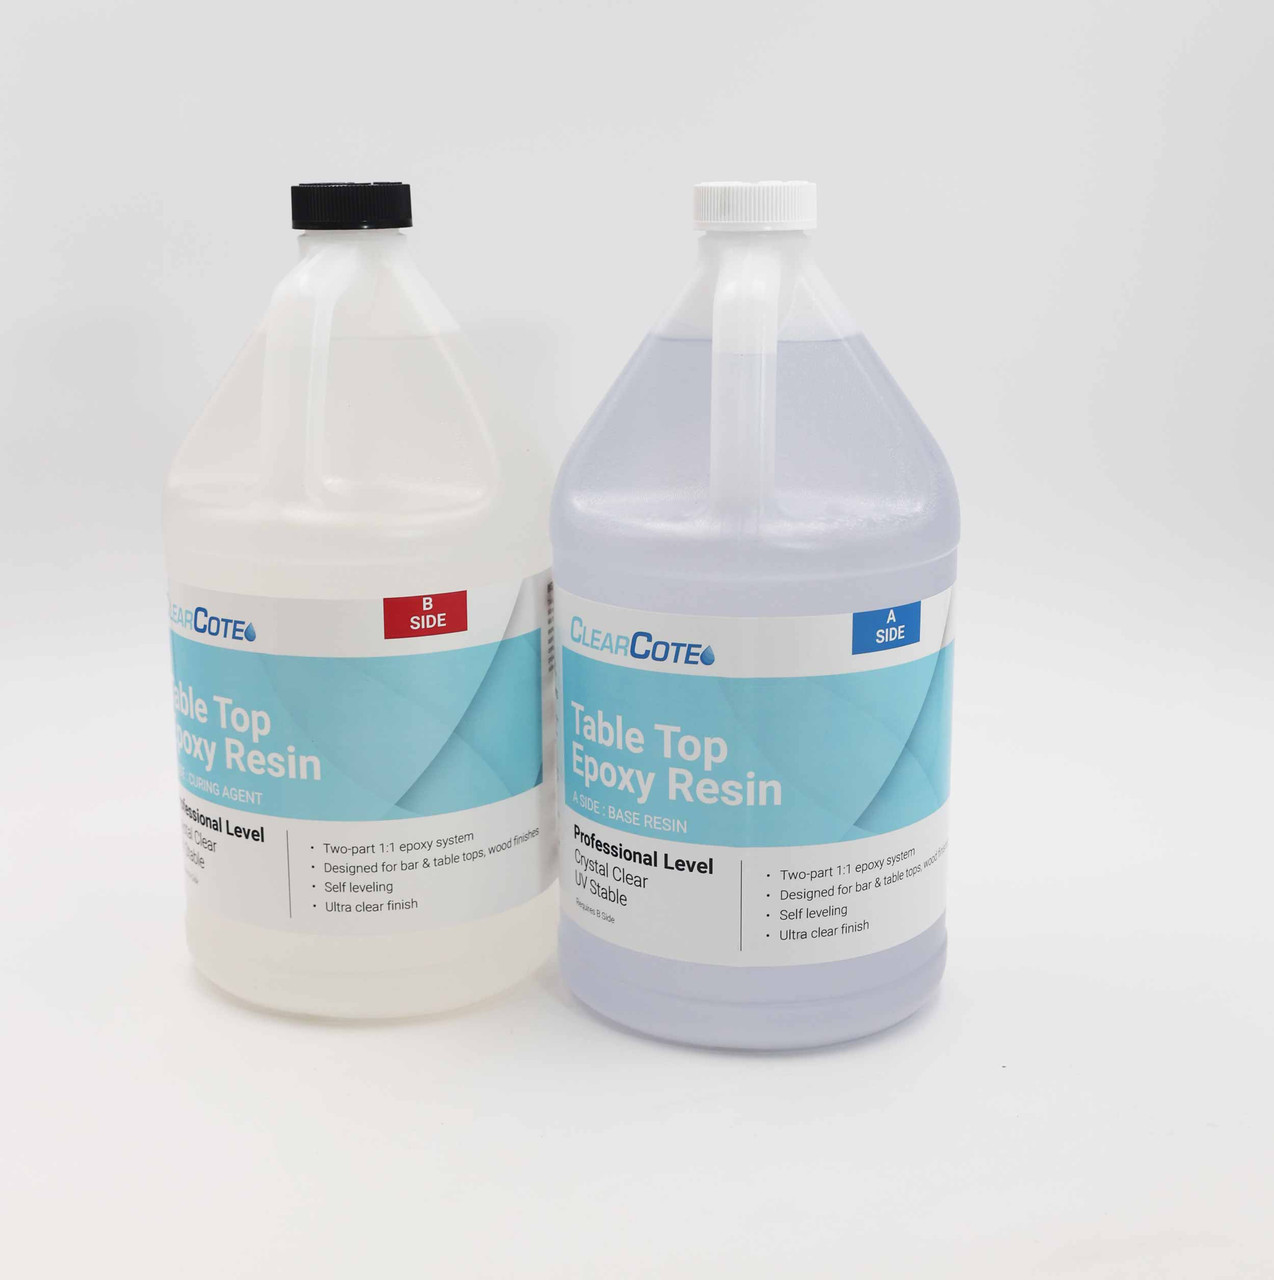 Epoxy Resin Crystal Clear 2 Gallon Kit for Super Gloss Coating and Tabletops